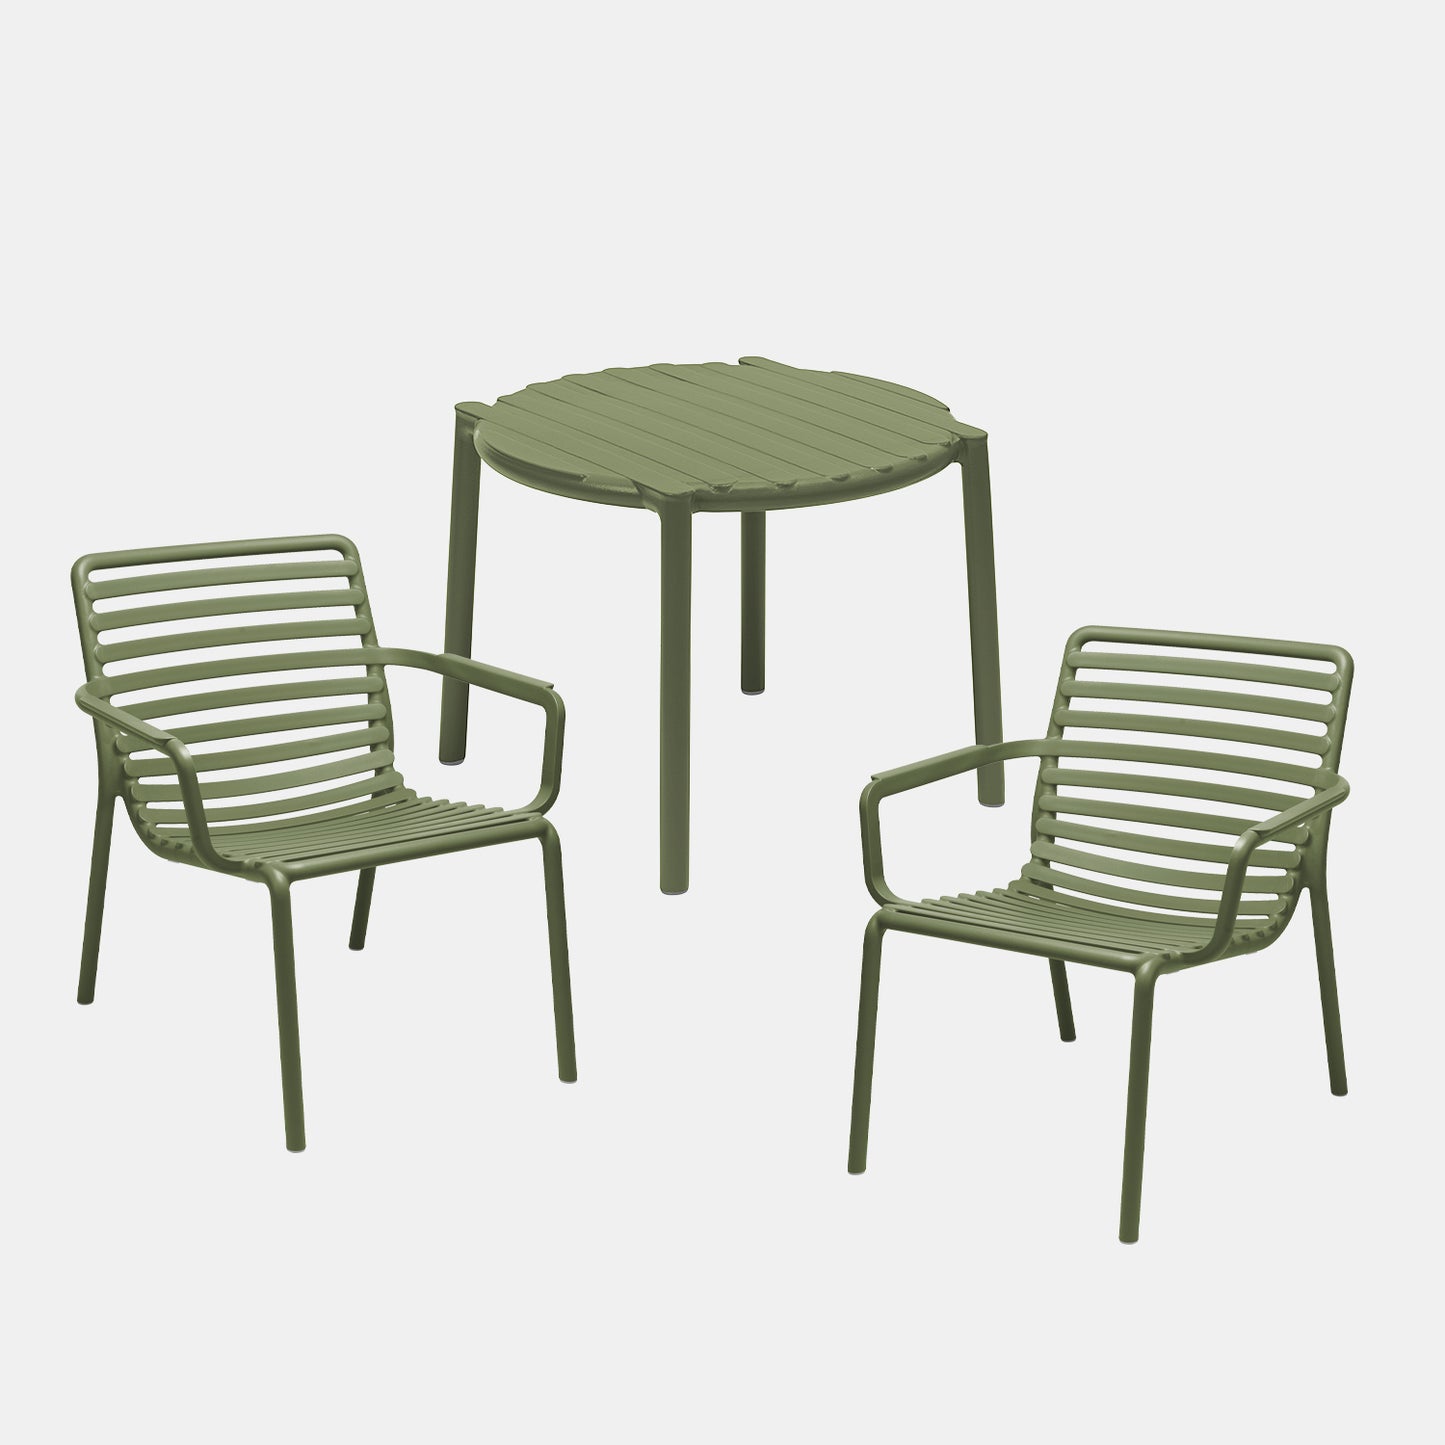 Dining Set - Doga Garden Table & x2 Doga Relax Chairs - Olive